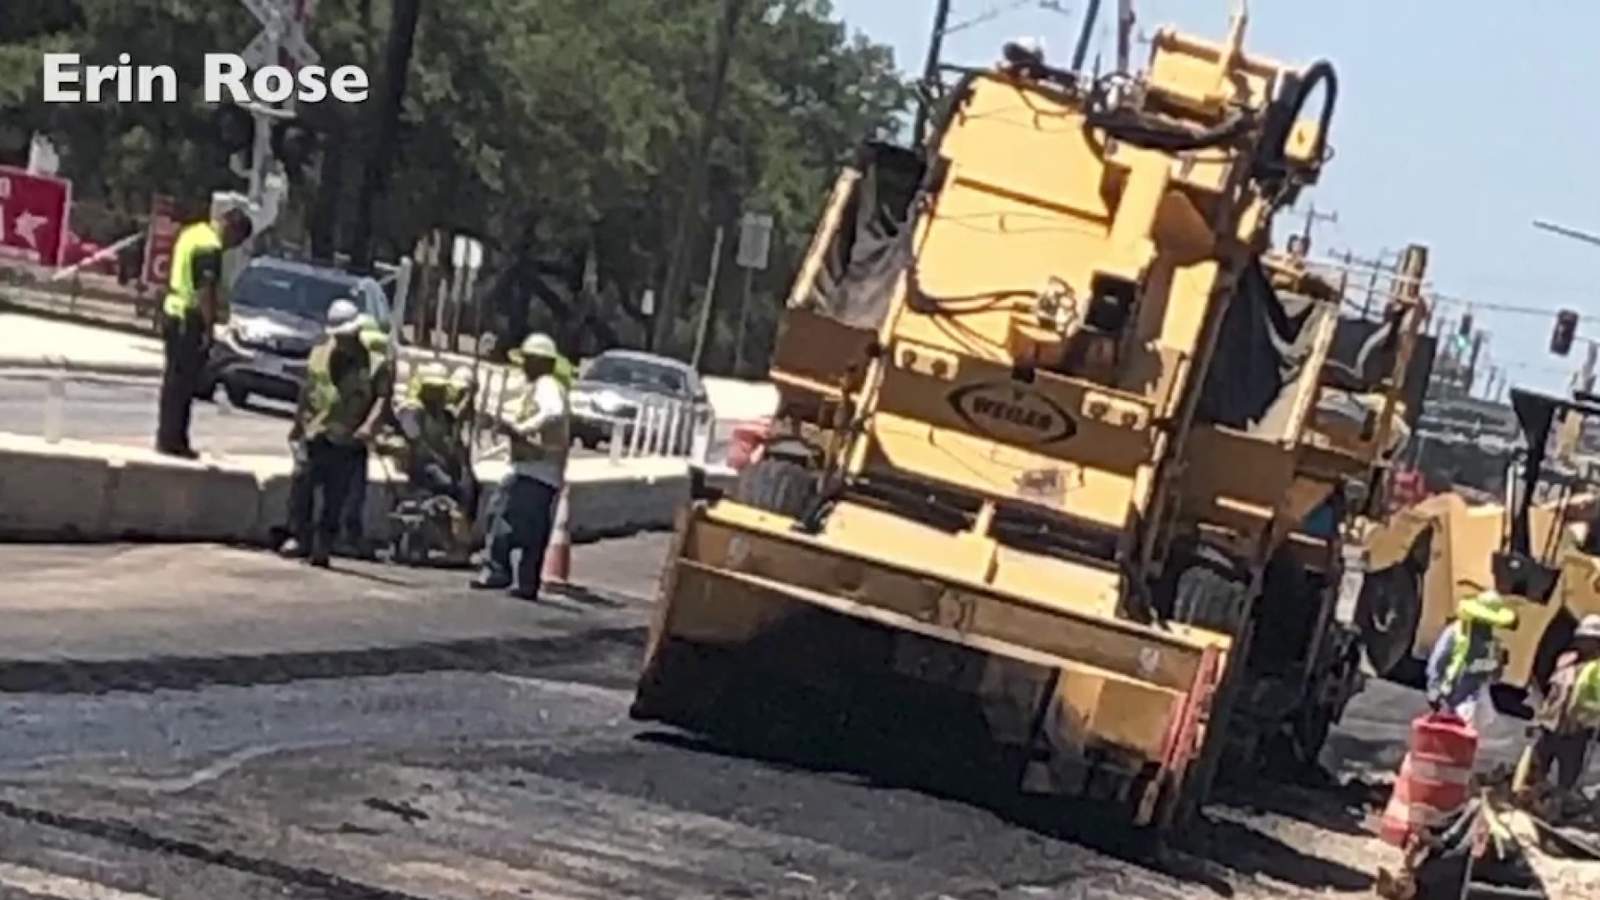 What weve gotten so far is headaches: Councilman, residents frustrated over delays in De Zavala Road Project